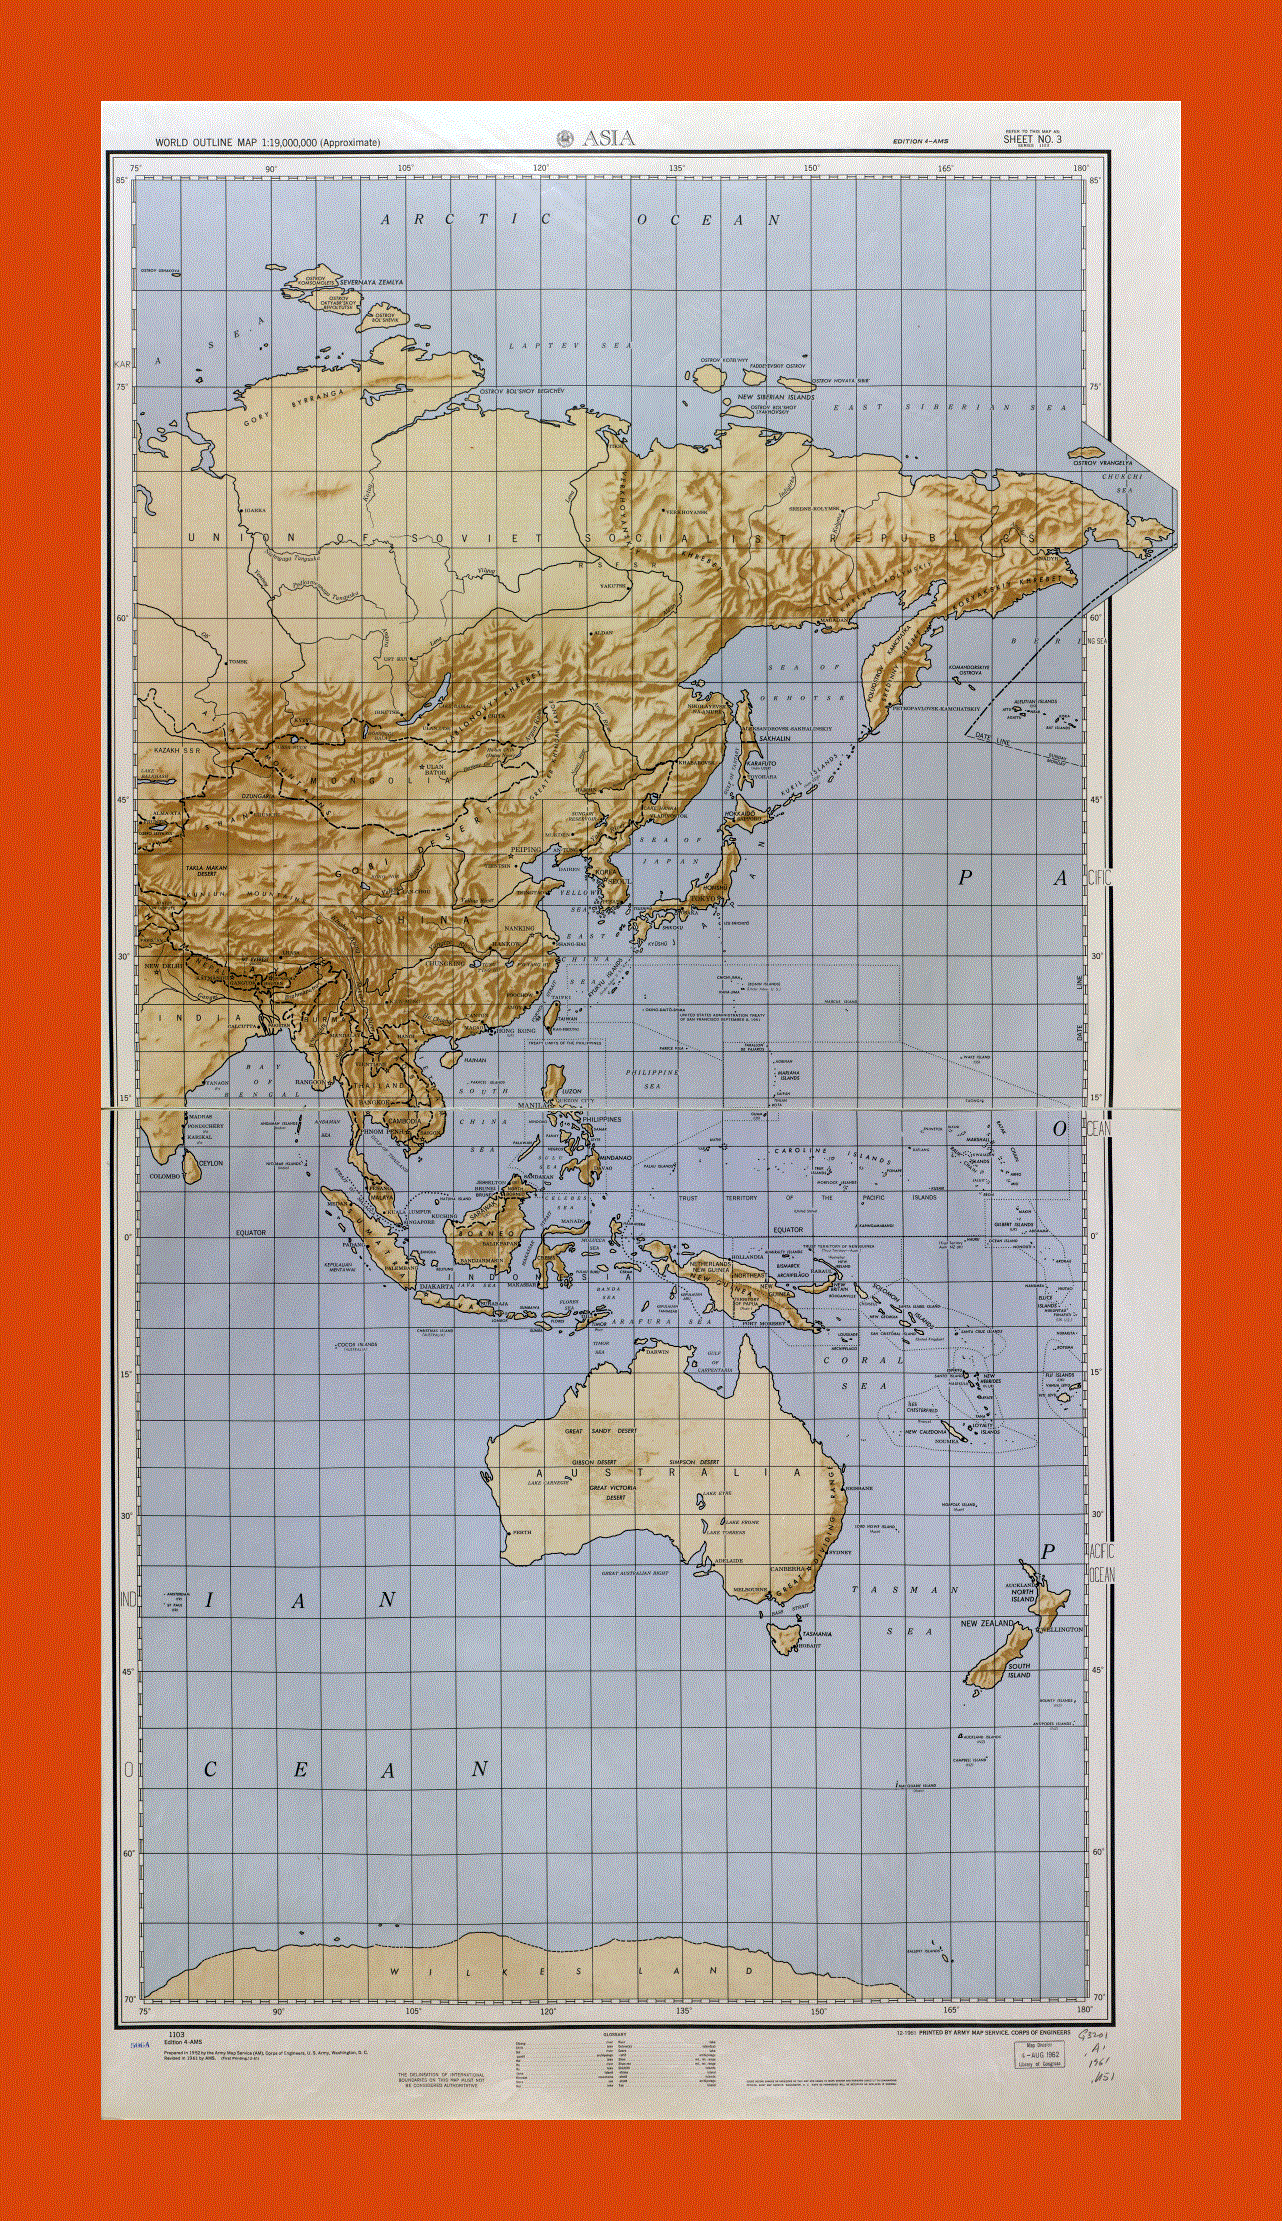 World outline map - part 3 (Asia) 1961-62